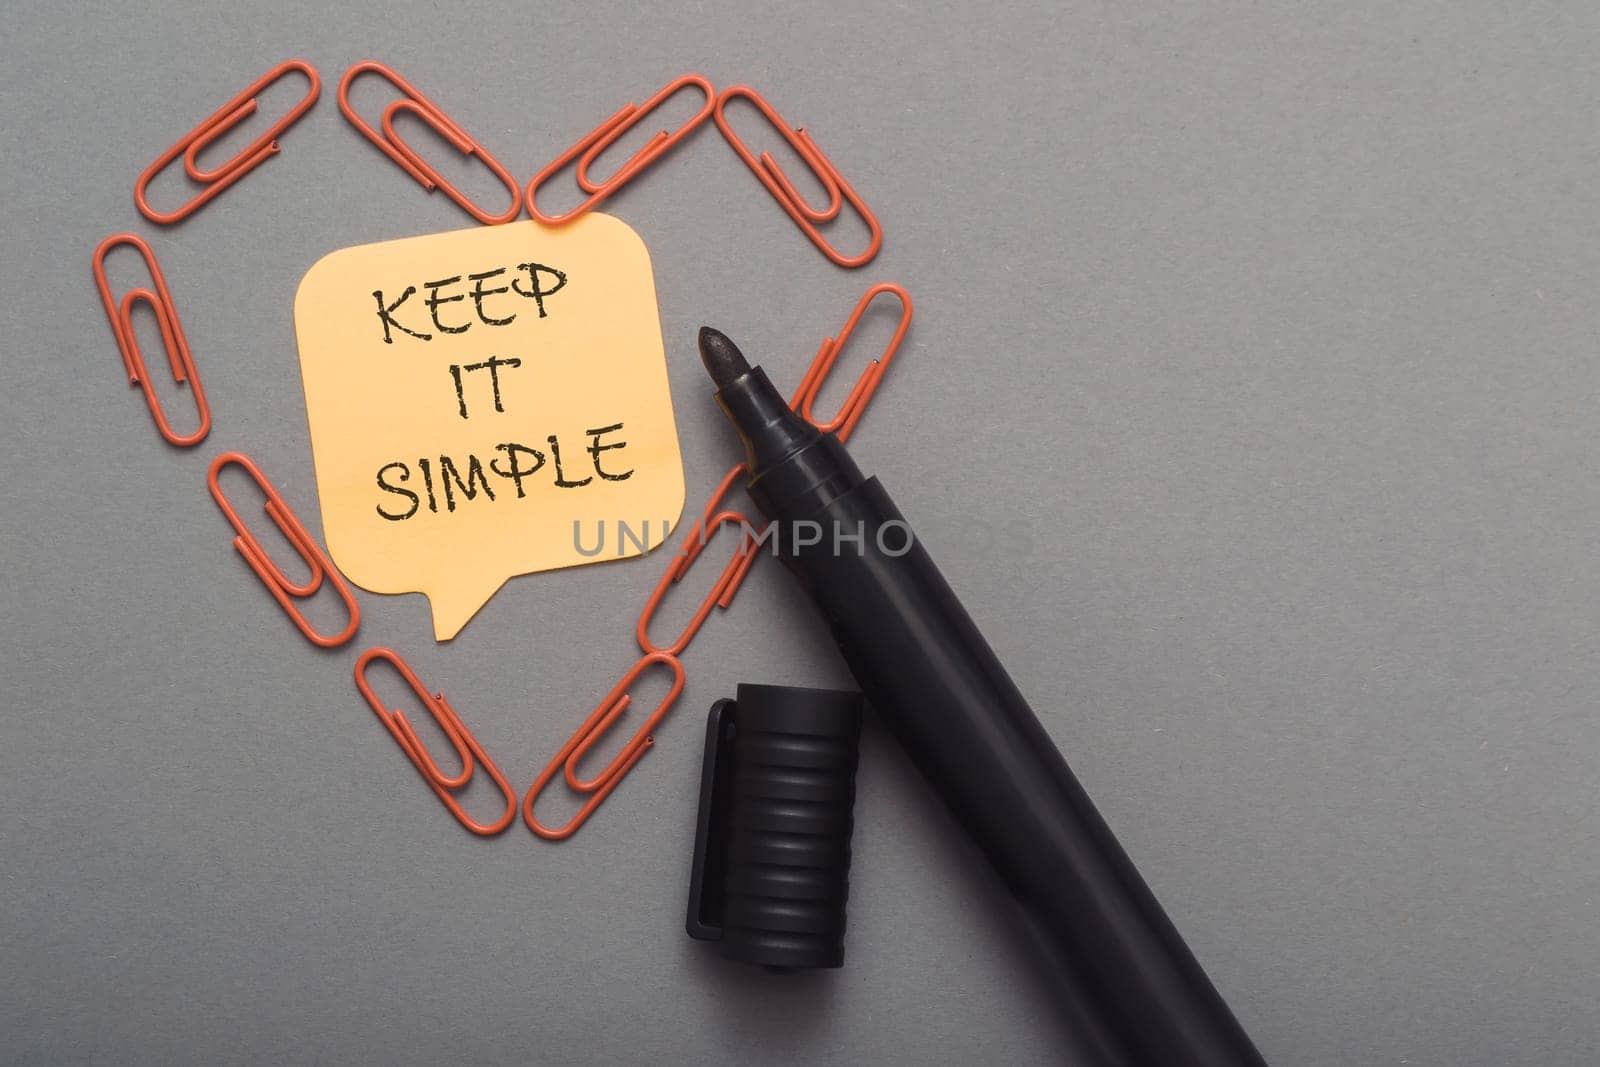 Keep it simple is written on a yellow sticky note on a gray desk.